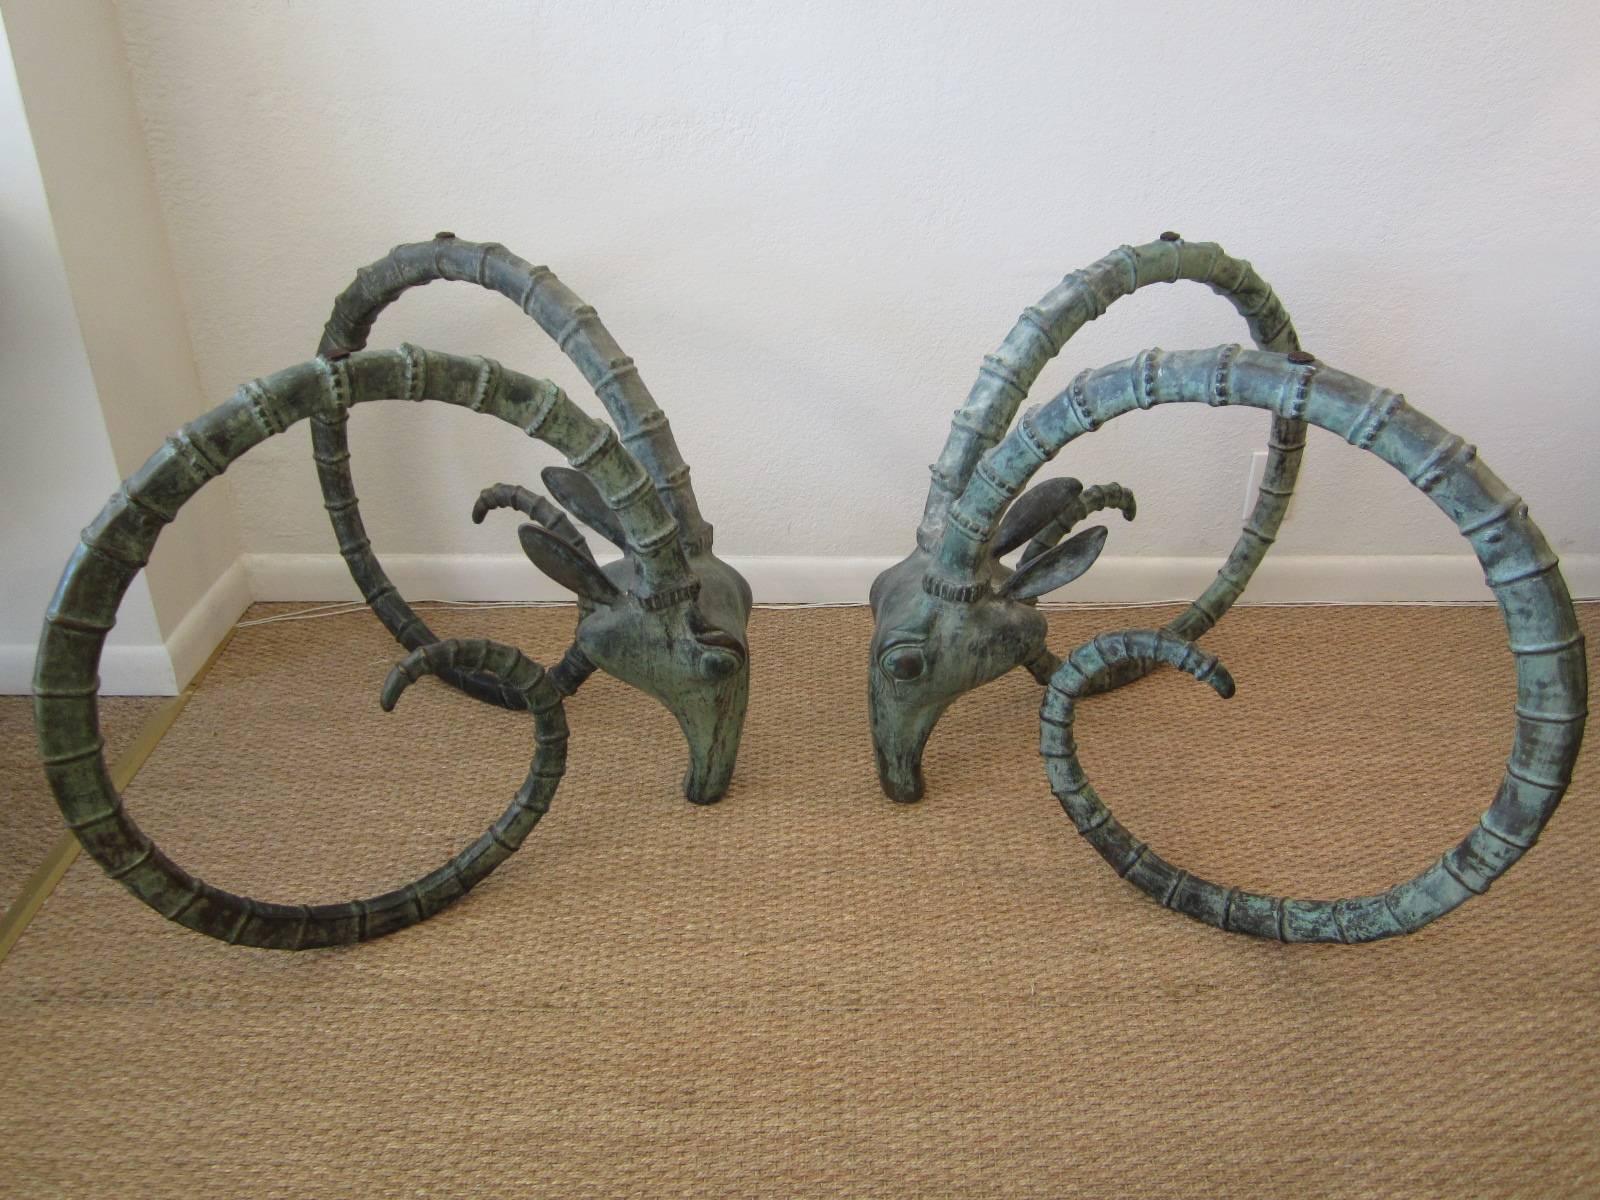 Wonderful pair of bronze ibex head table bases made for dining table or desk. Beautifully and naturally patinated, these bases are exquisite as they are yet they have the option to be polished to a shiny bronze/brass finish. They are perfectly ready